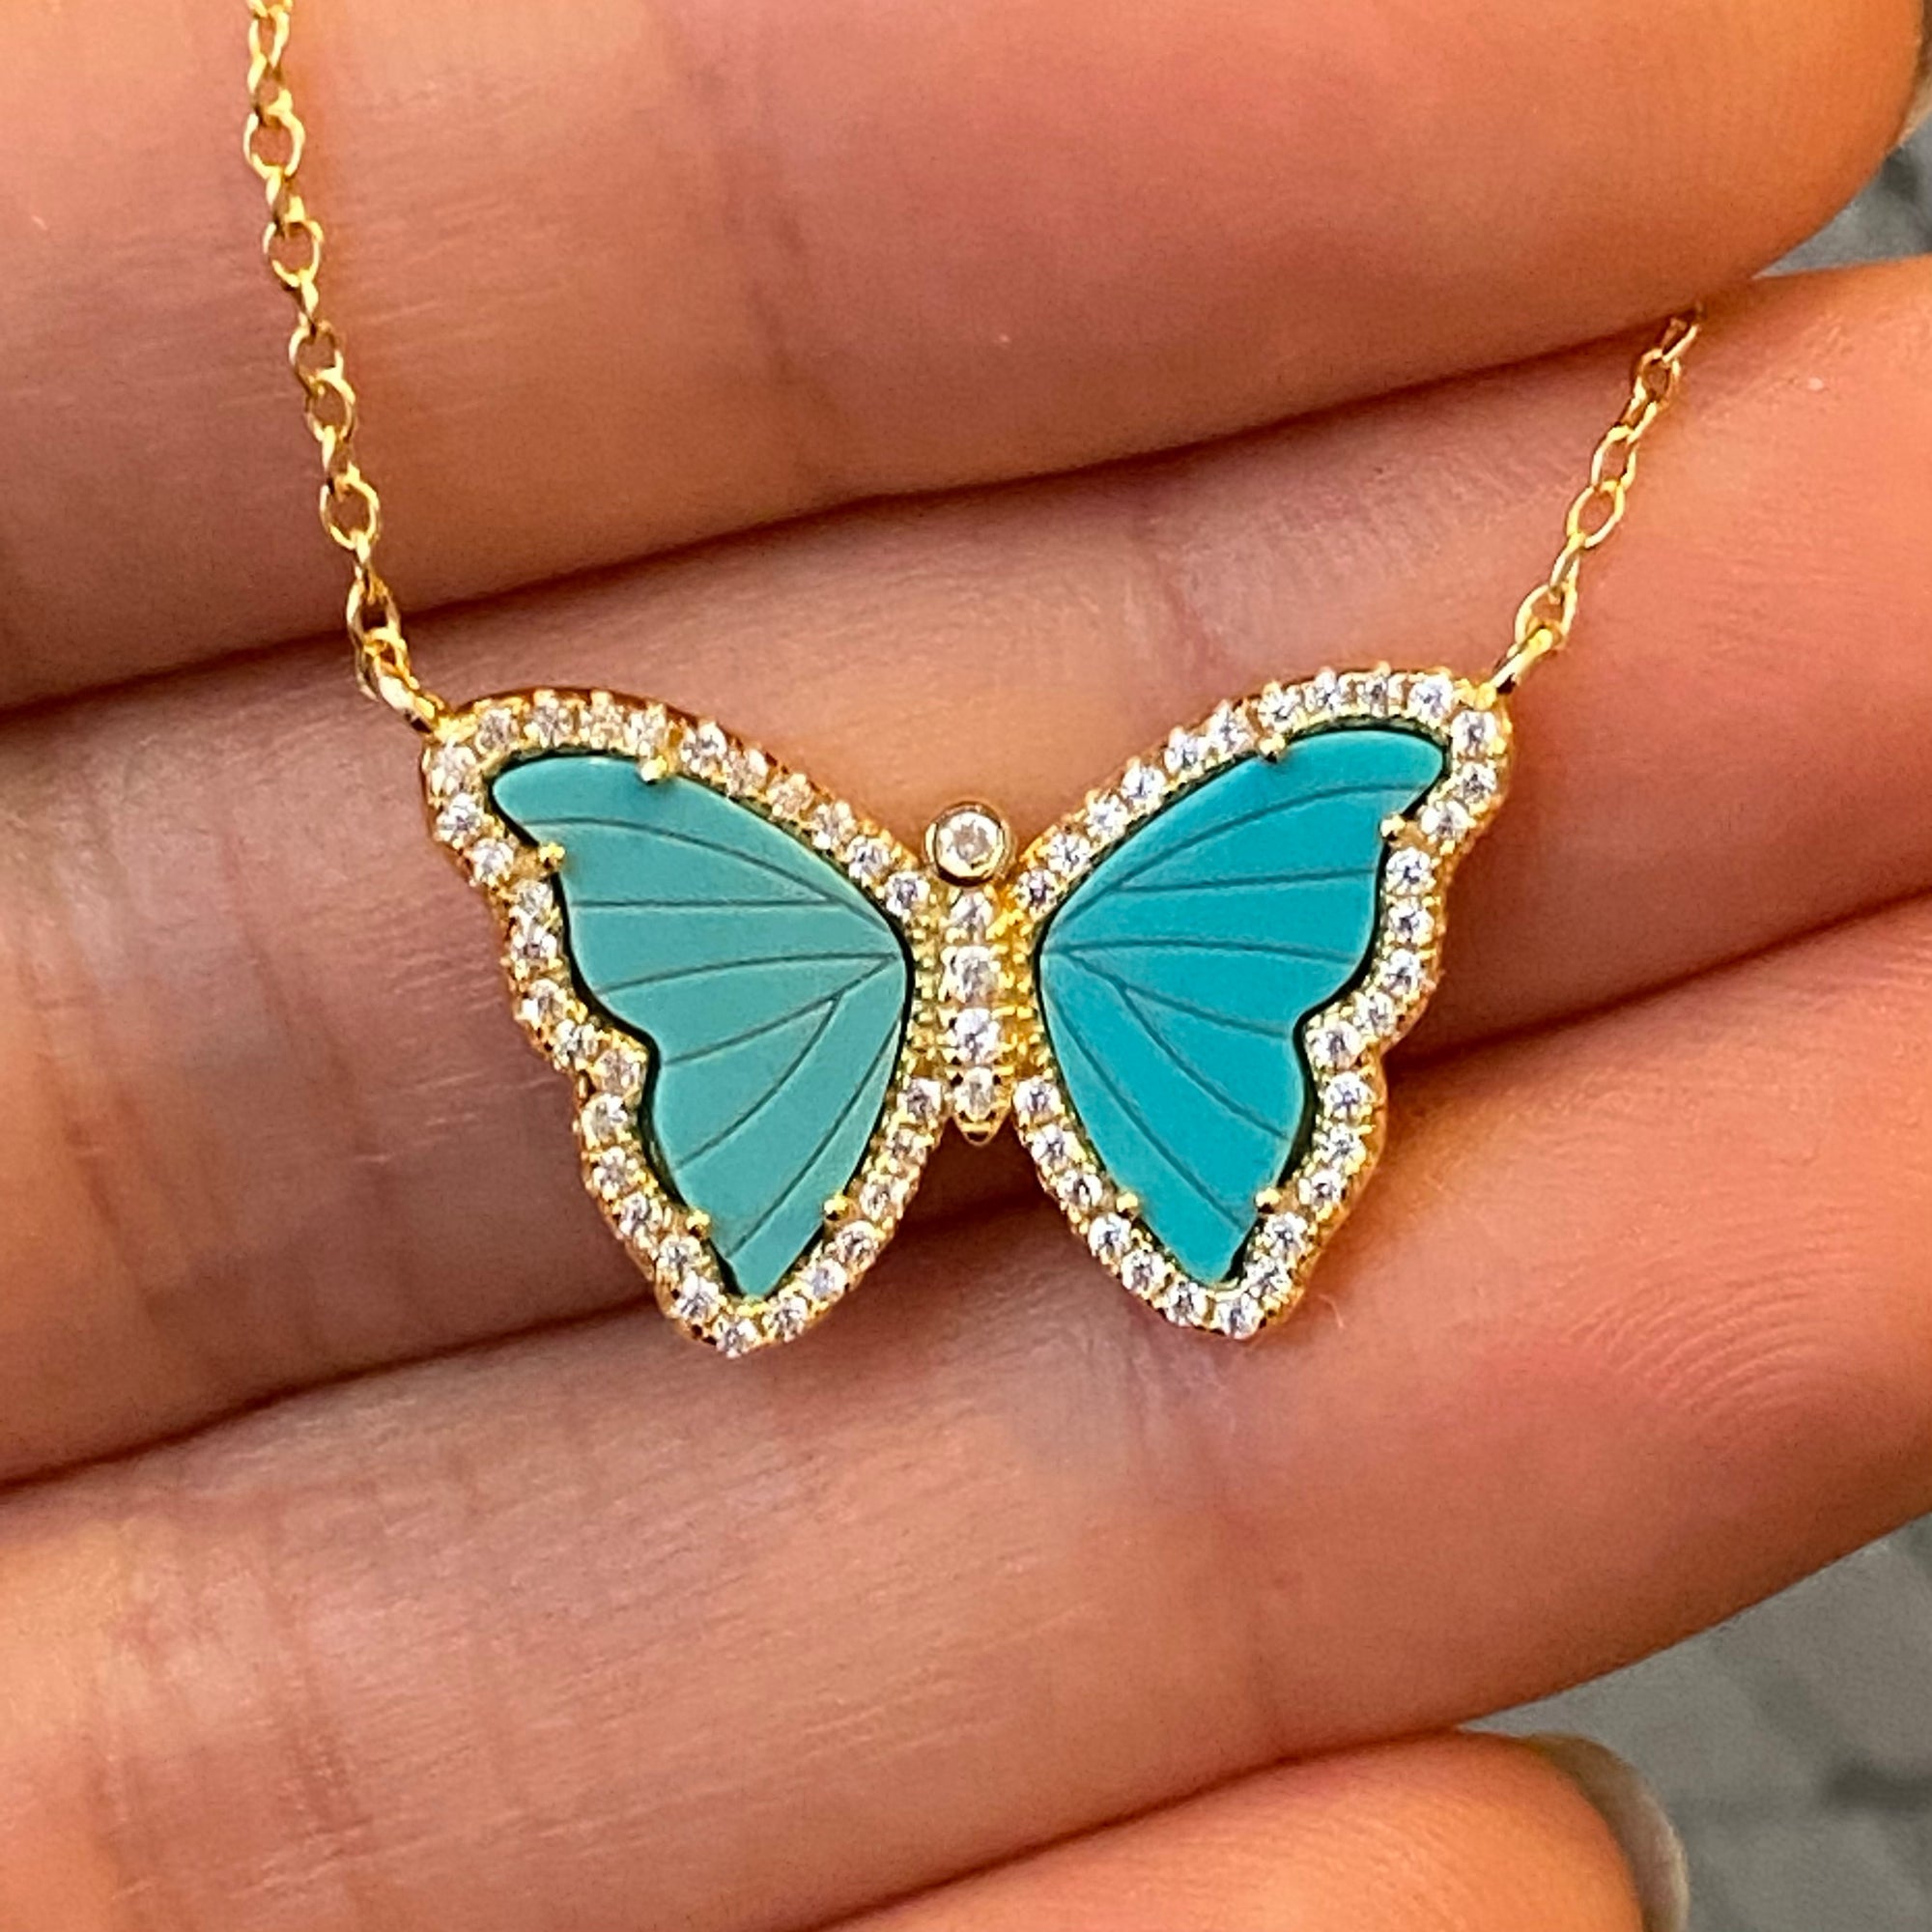 Turquoise Butterfly Necklace With Crystals